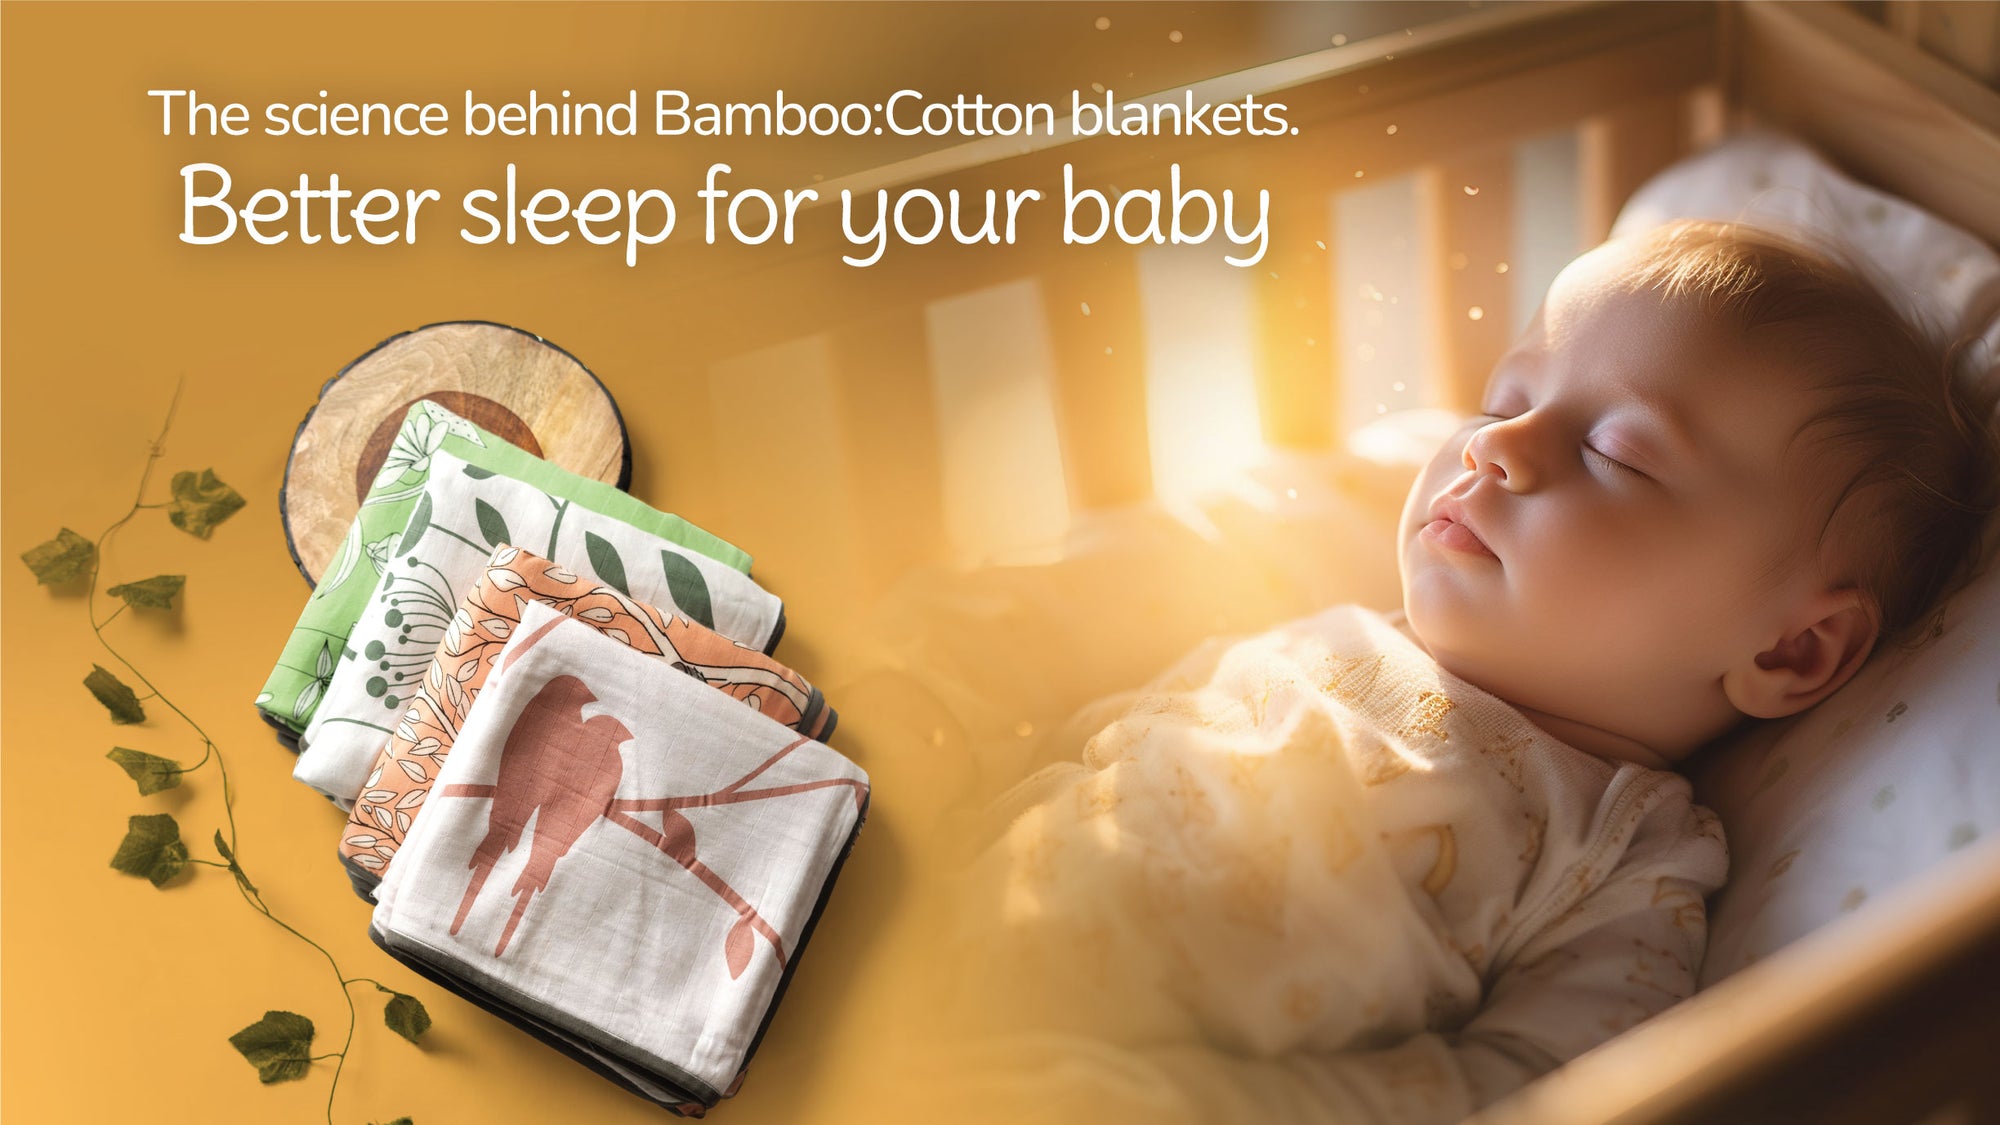 The science behind Bamboo:Cotton blankets.